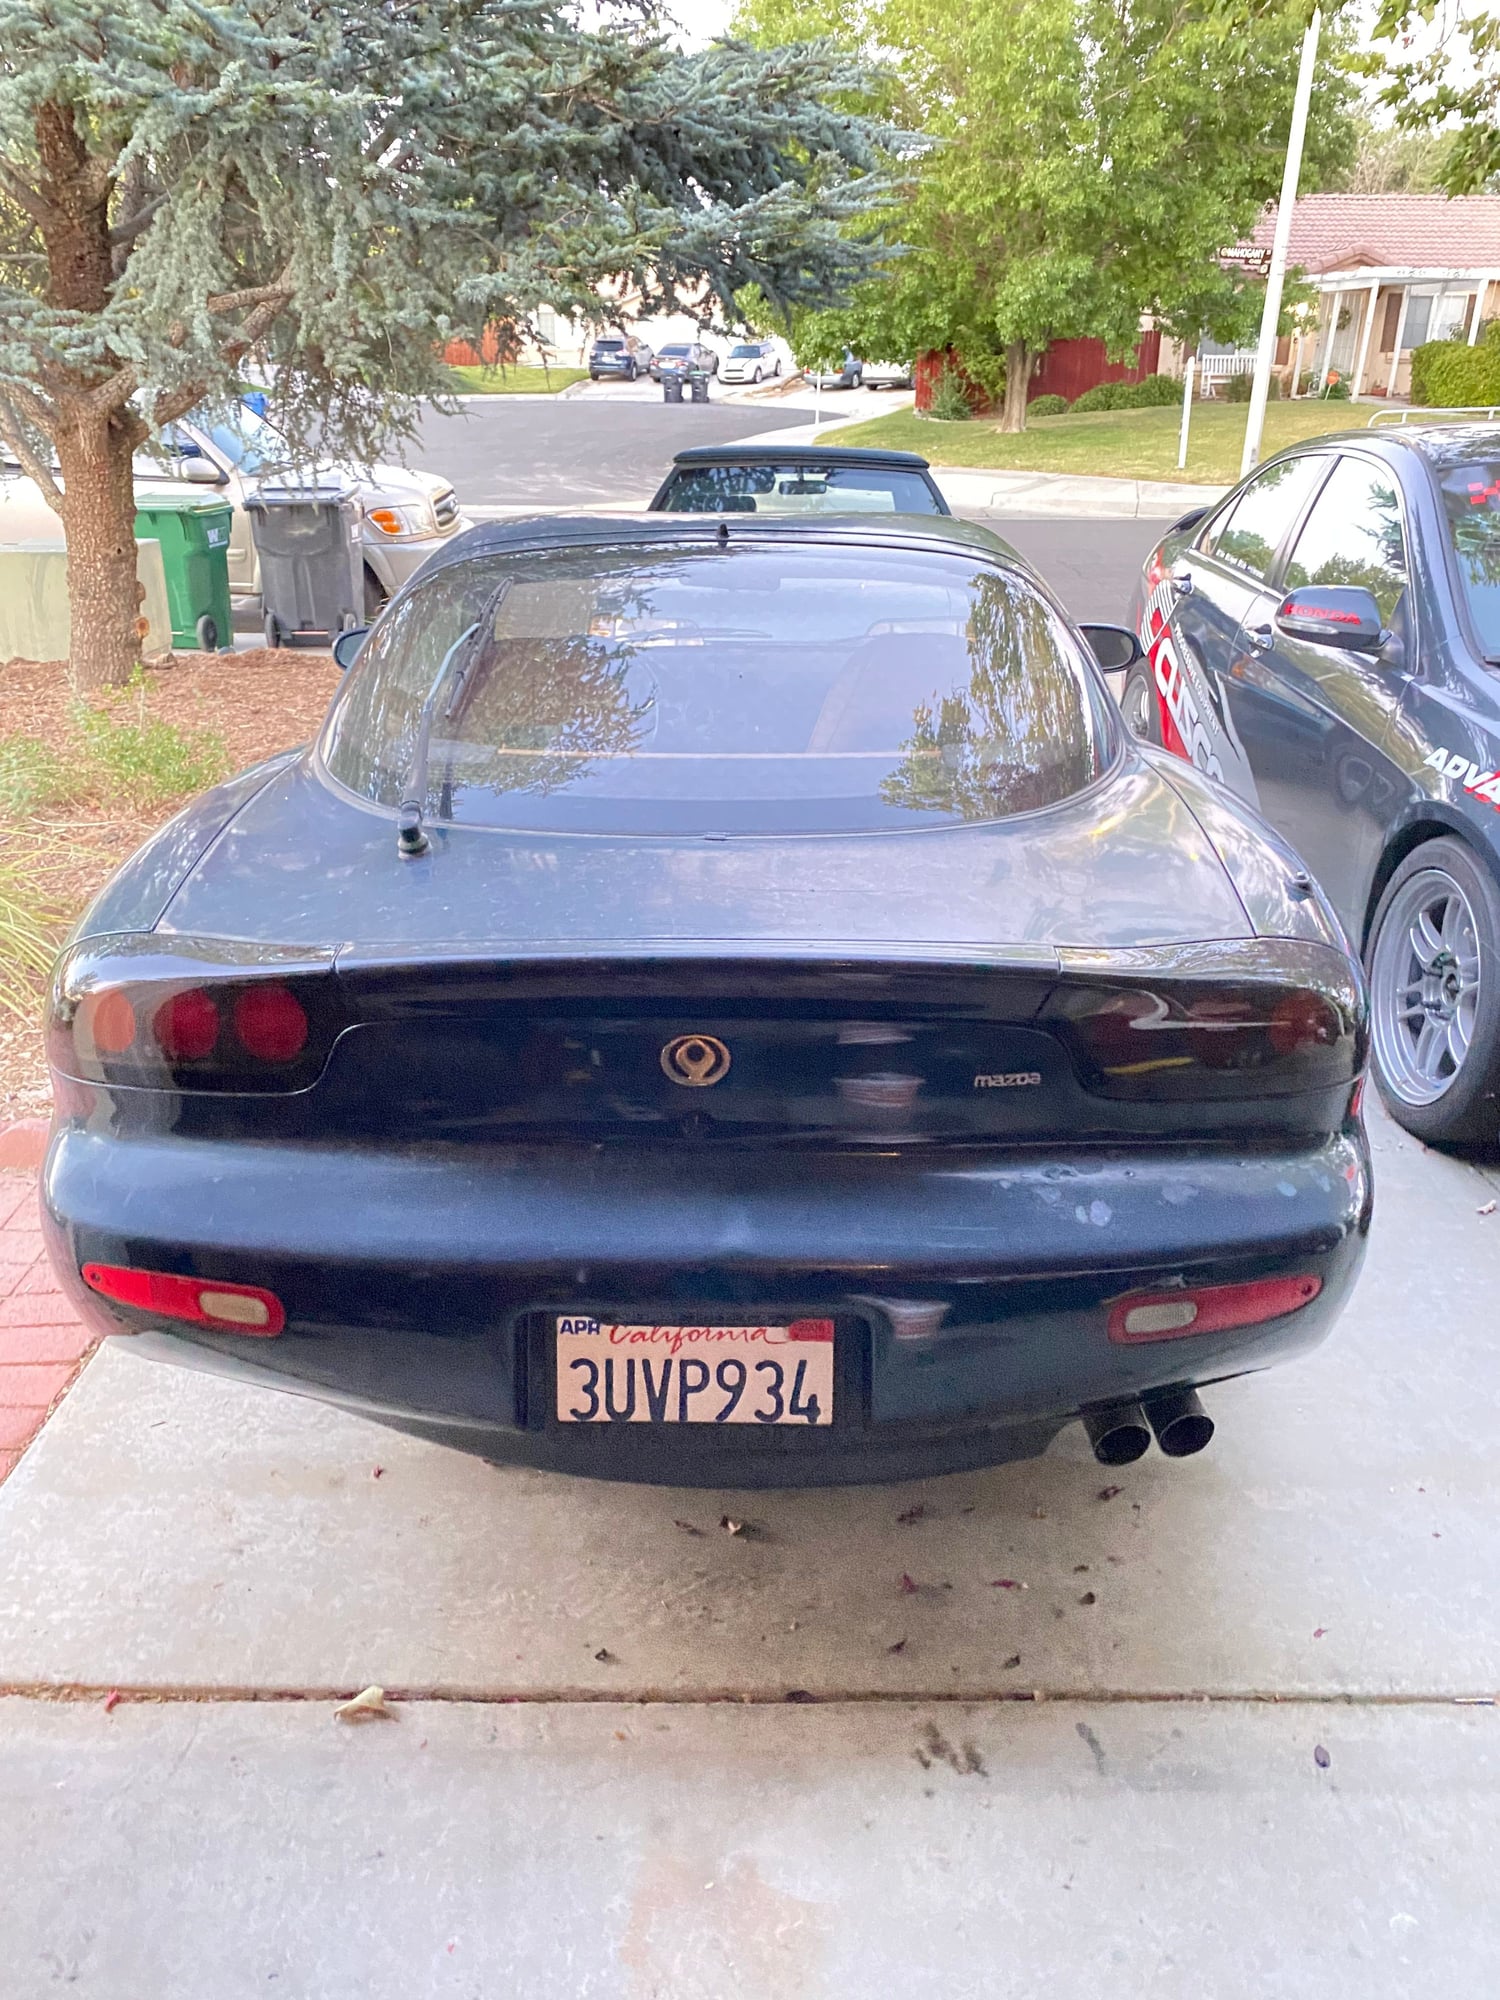 1993 Mazda RX-7 - 1993 RX7 Touring, Clean CA title car, will come with new crate motor - Used - VIN JM1FD331xp0203069 - 97,000 Miles - Other - 2WD - Manual - Hatchback - Blue - Rosamond, CA 93560, United States